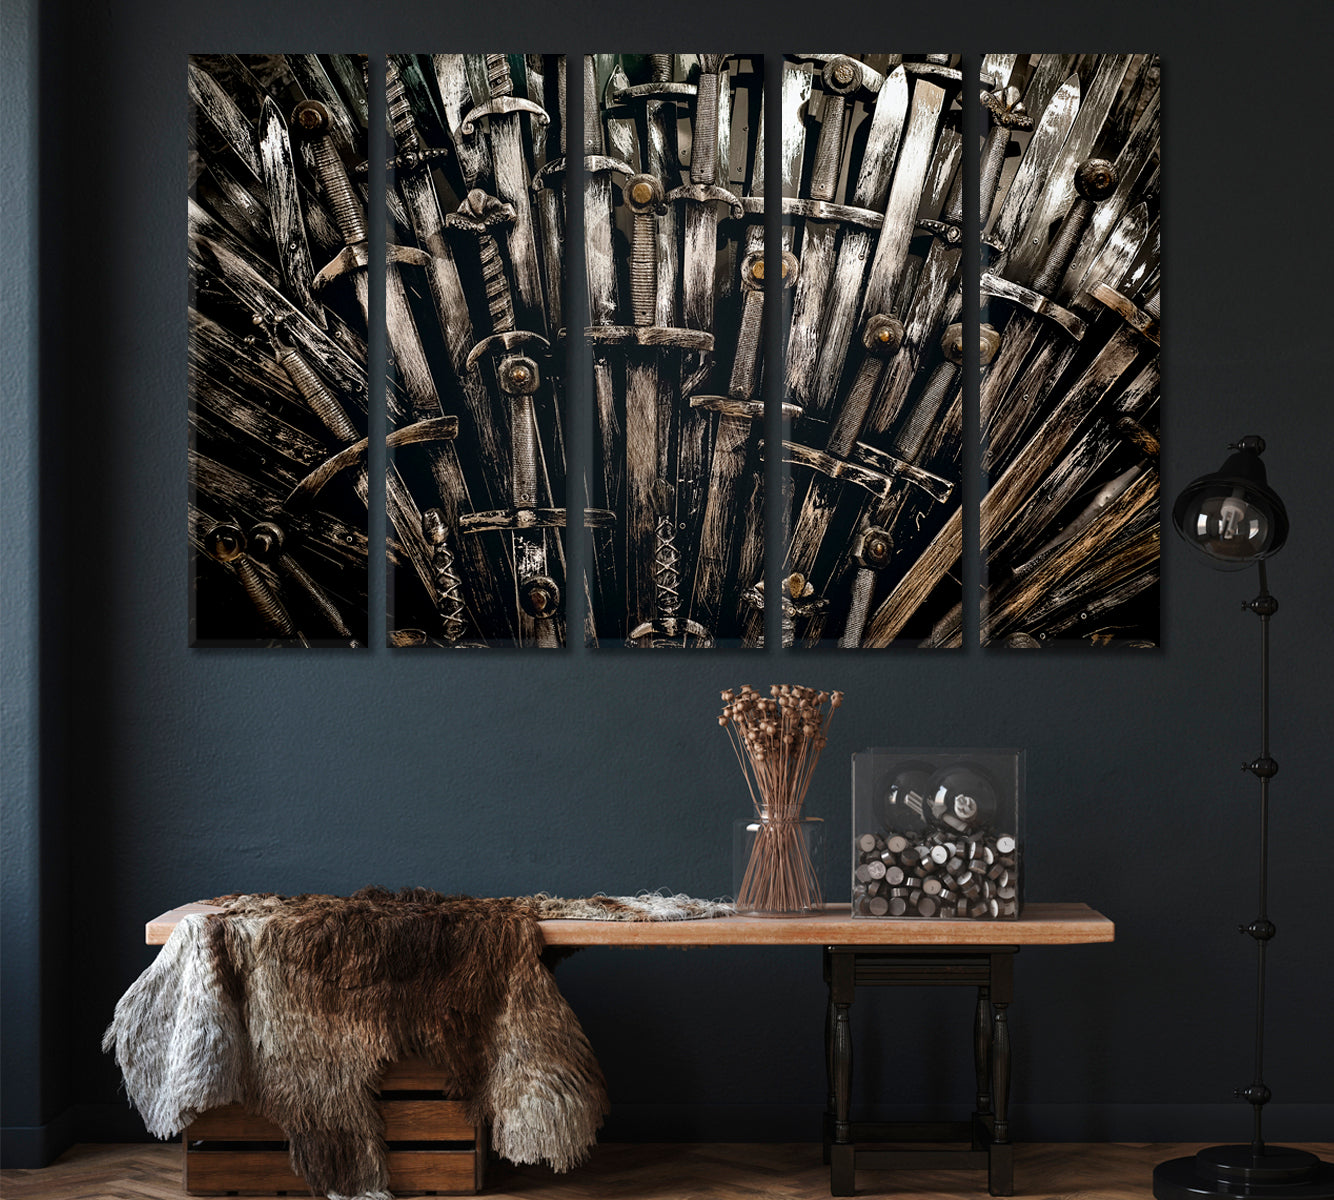 Knight Swords Canvas Print ArtLexy 5 Panels 36"x24" inches 